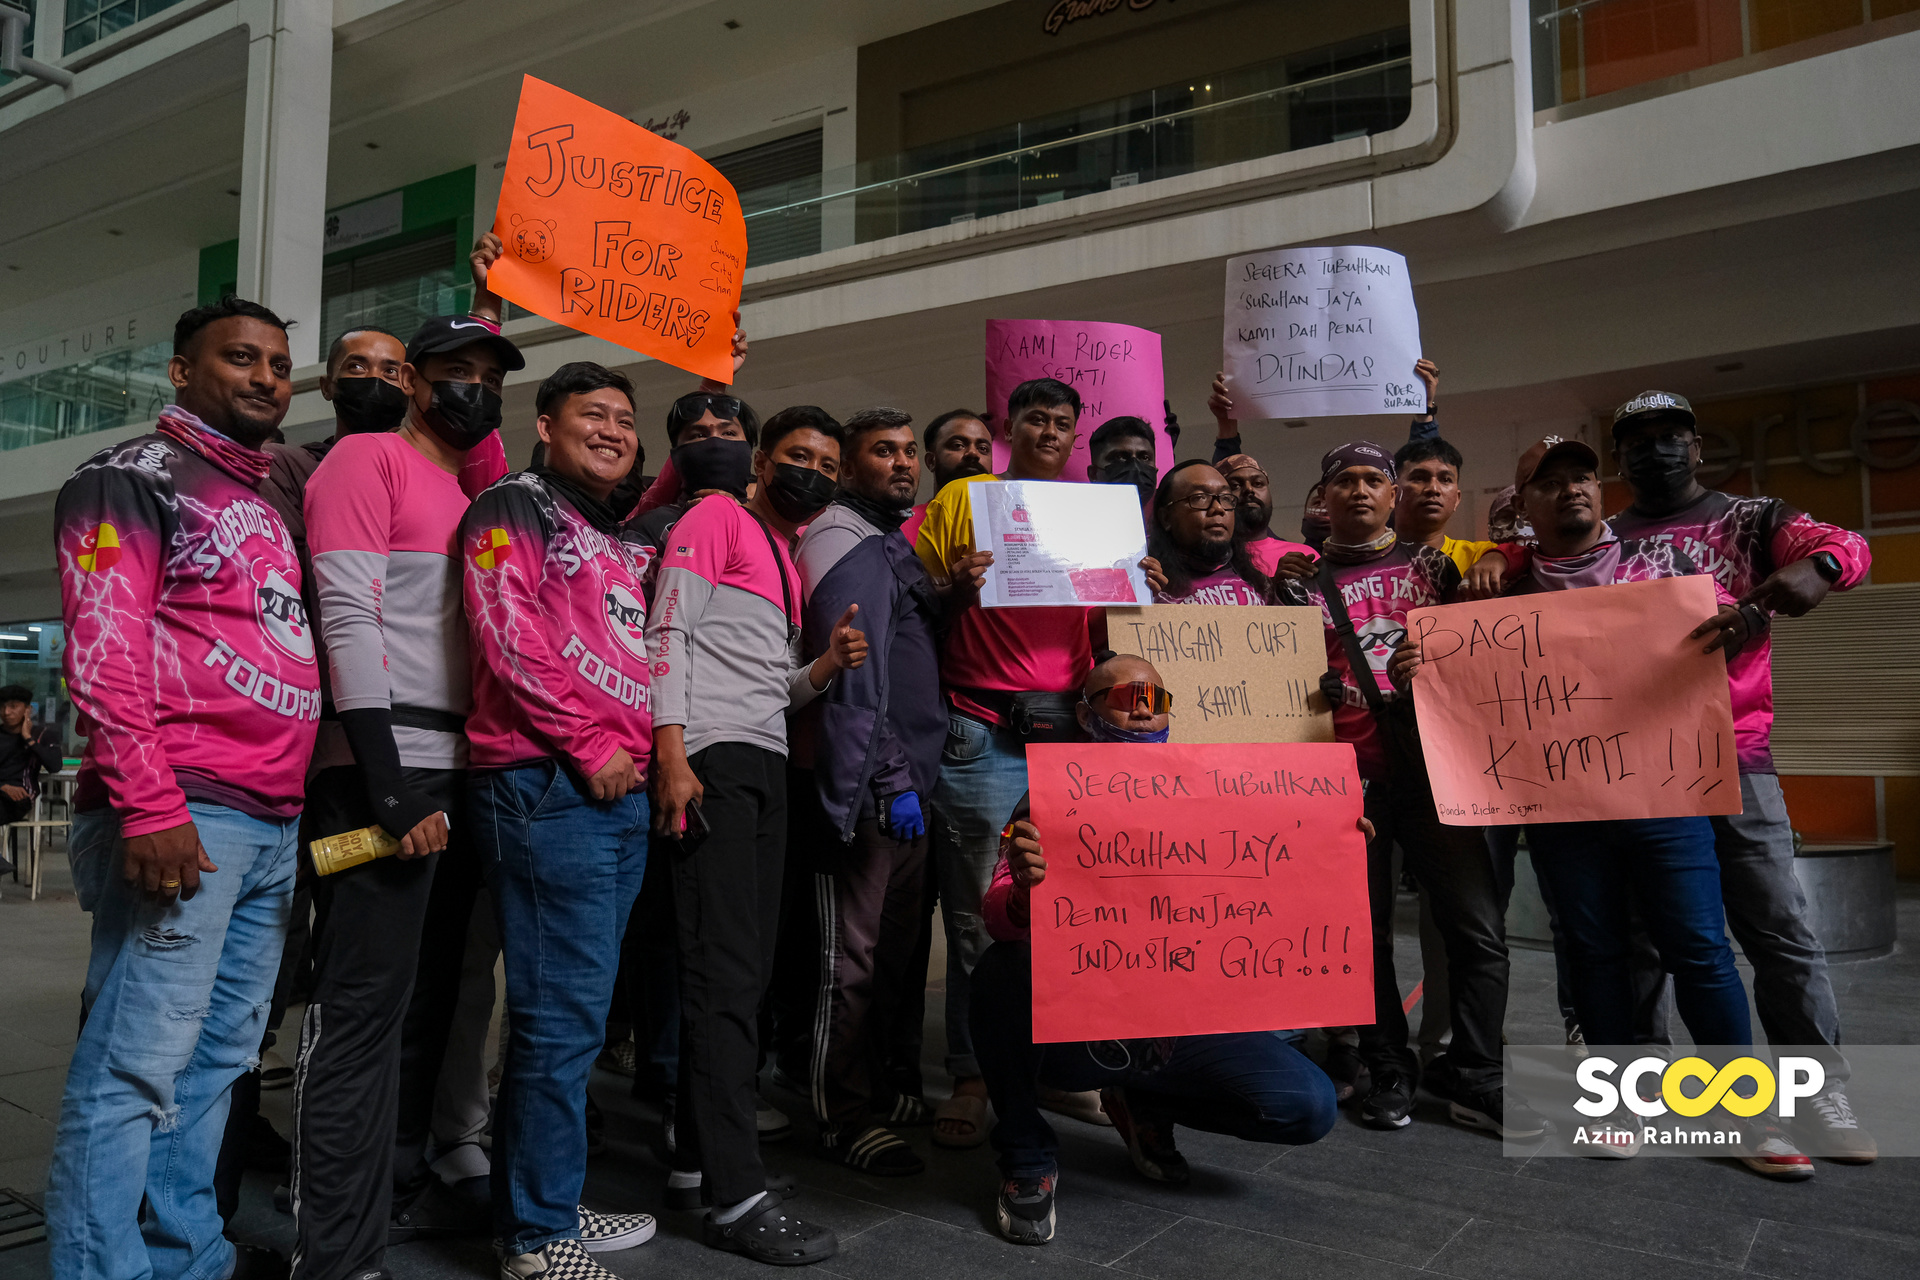 More than 100 Foodpanda riders protest over low wages at company headquarters